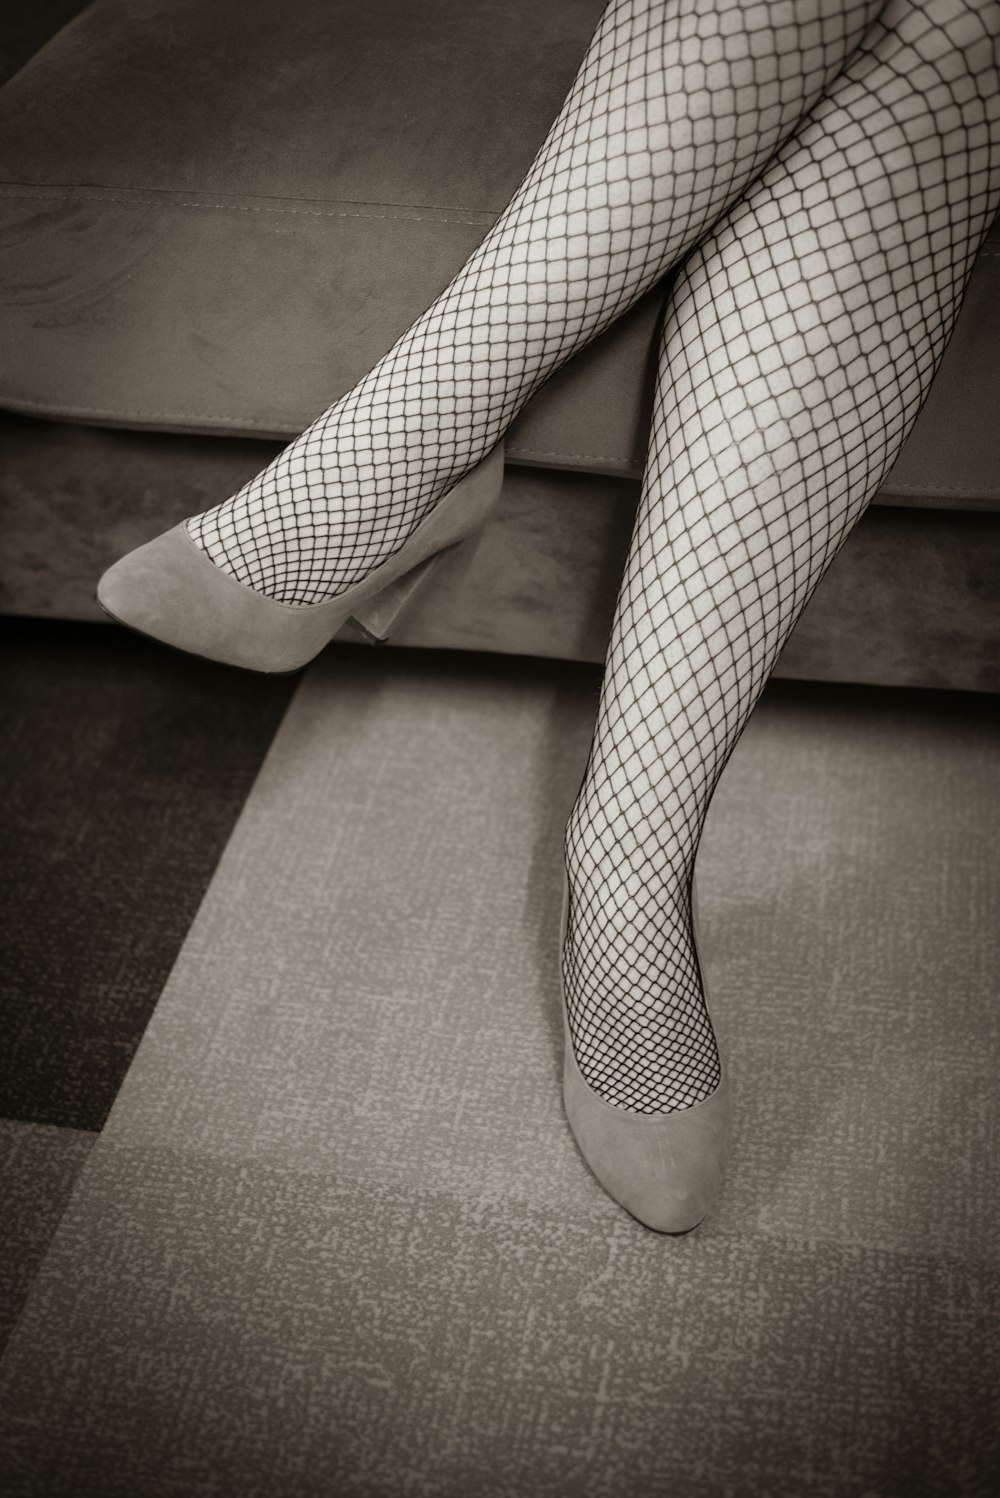 a black and white photo of a woman's legs with fishnet stockings